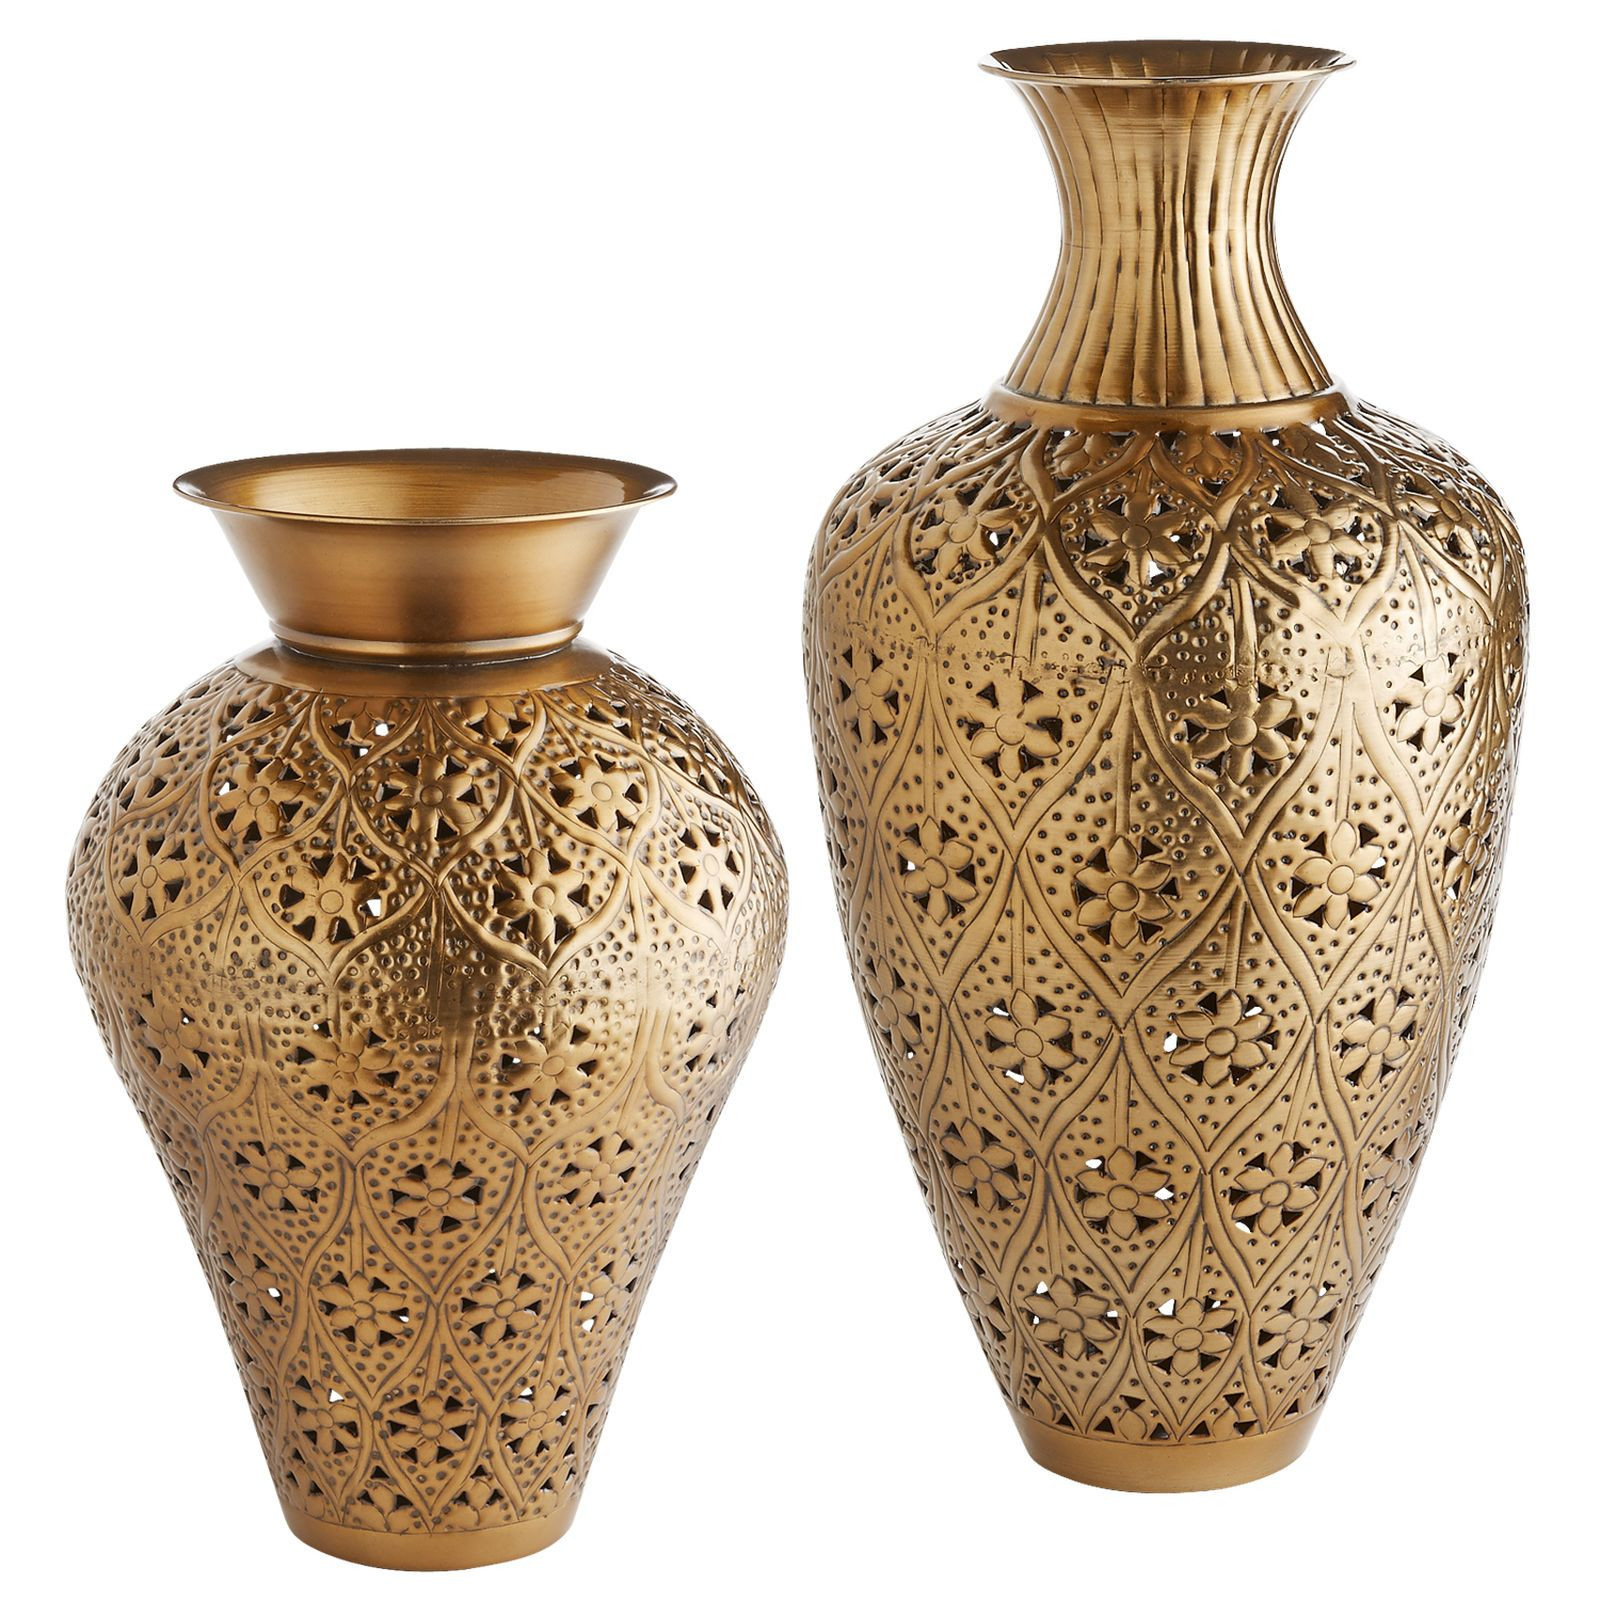 26 Lovely Bronze Vases for Sale 2024 free download bronze vases for sale of found the perfect additions to your diverse collection our with regard to found the perfect additions to your diverse collection our unconventional vases evoke that 